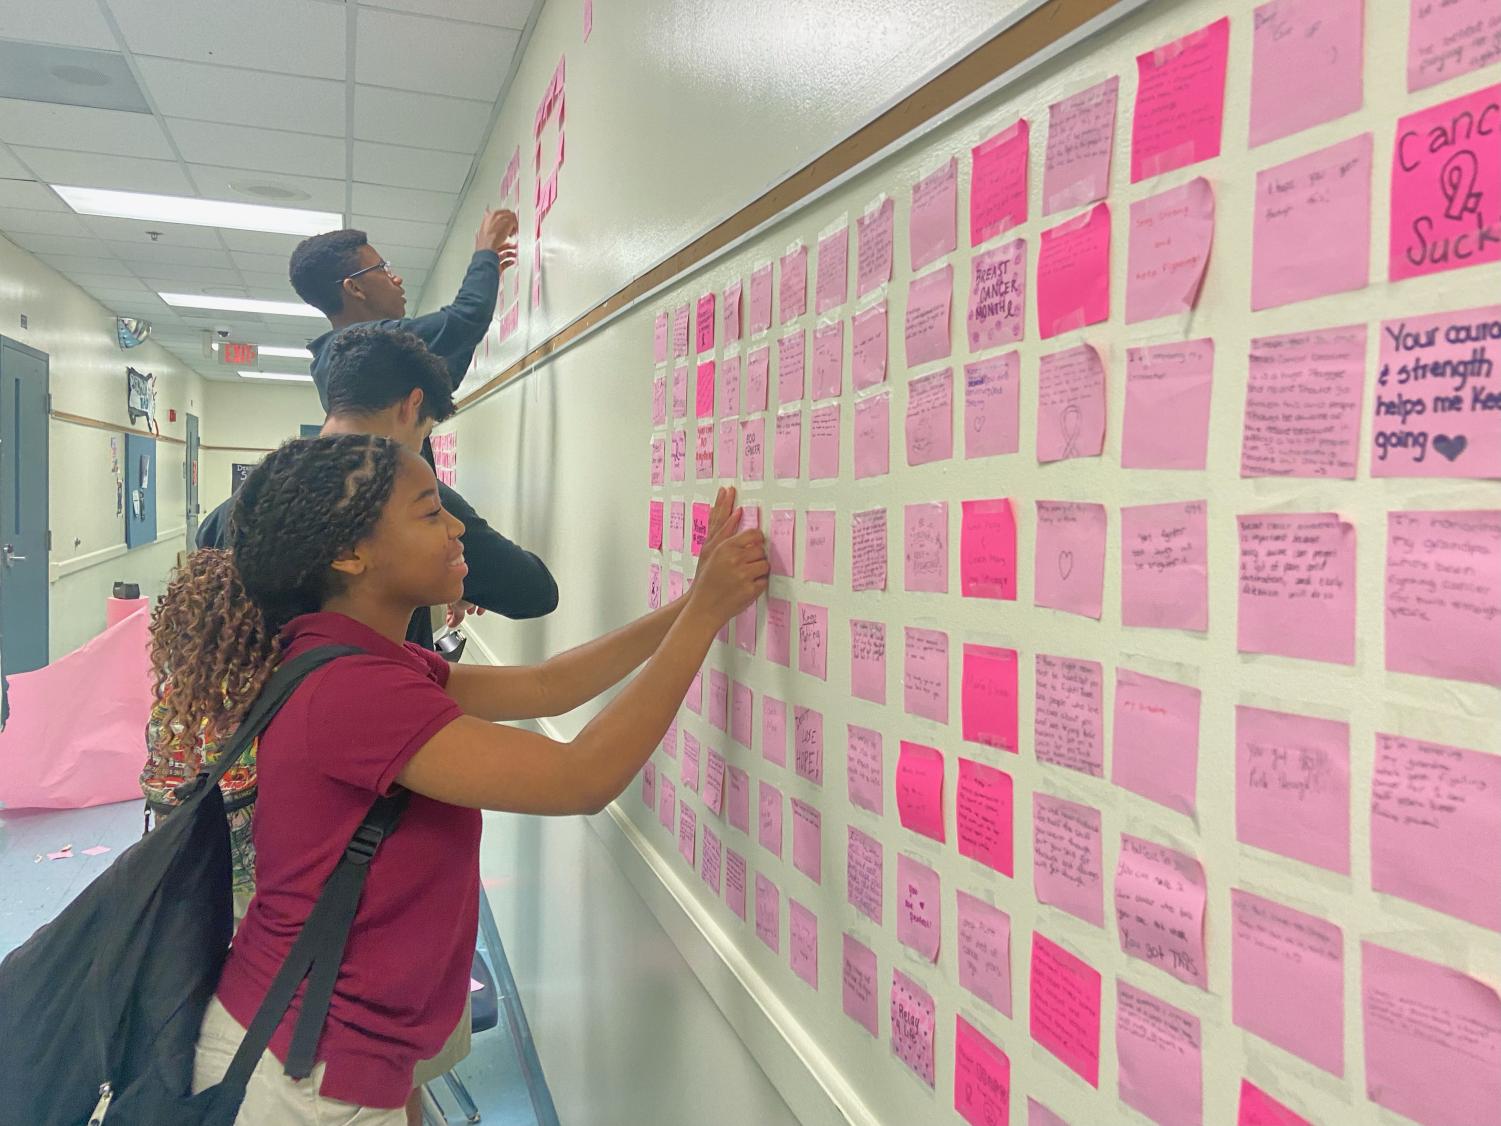 Tallahassee high school students use post-it notes to spread positivity